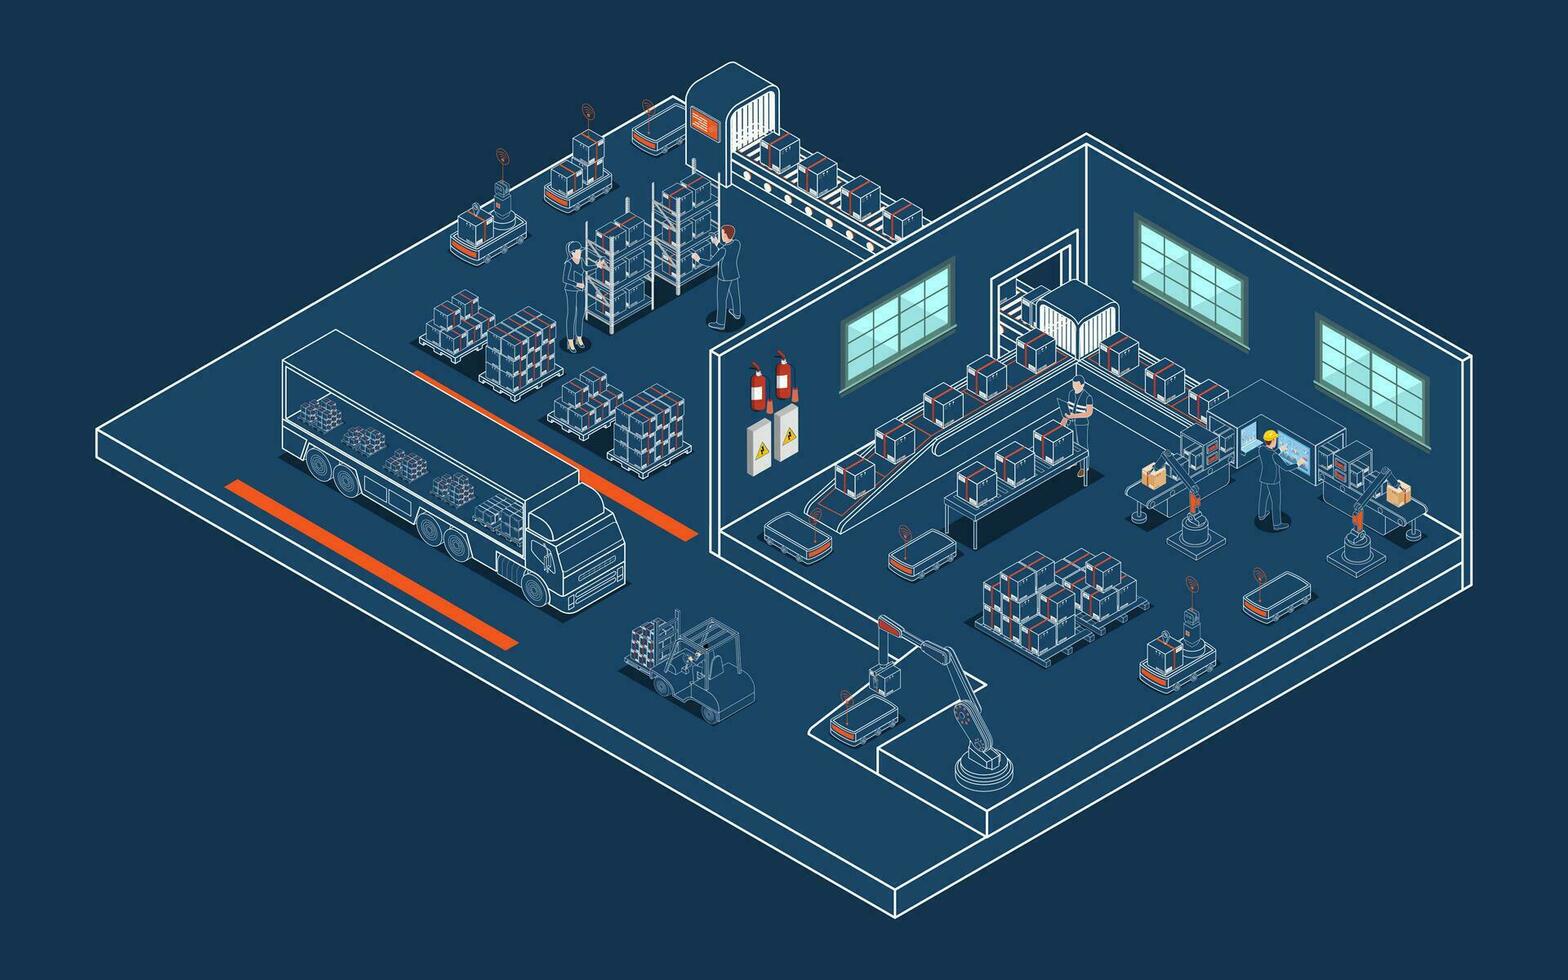 Logistics Warehouse Work Process Concept with Transportation operation service, Industrial Internet of Things and Autonomous Robot. Vector illustration EPS 10